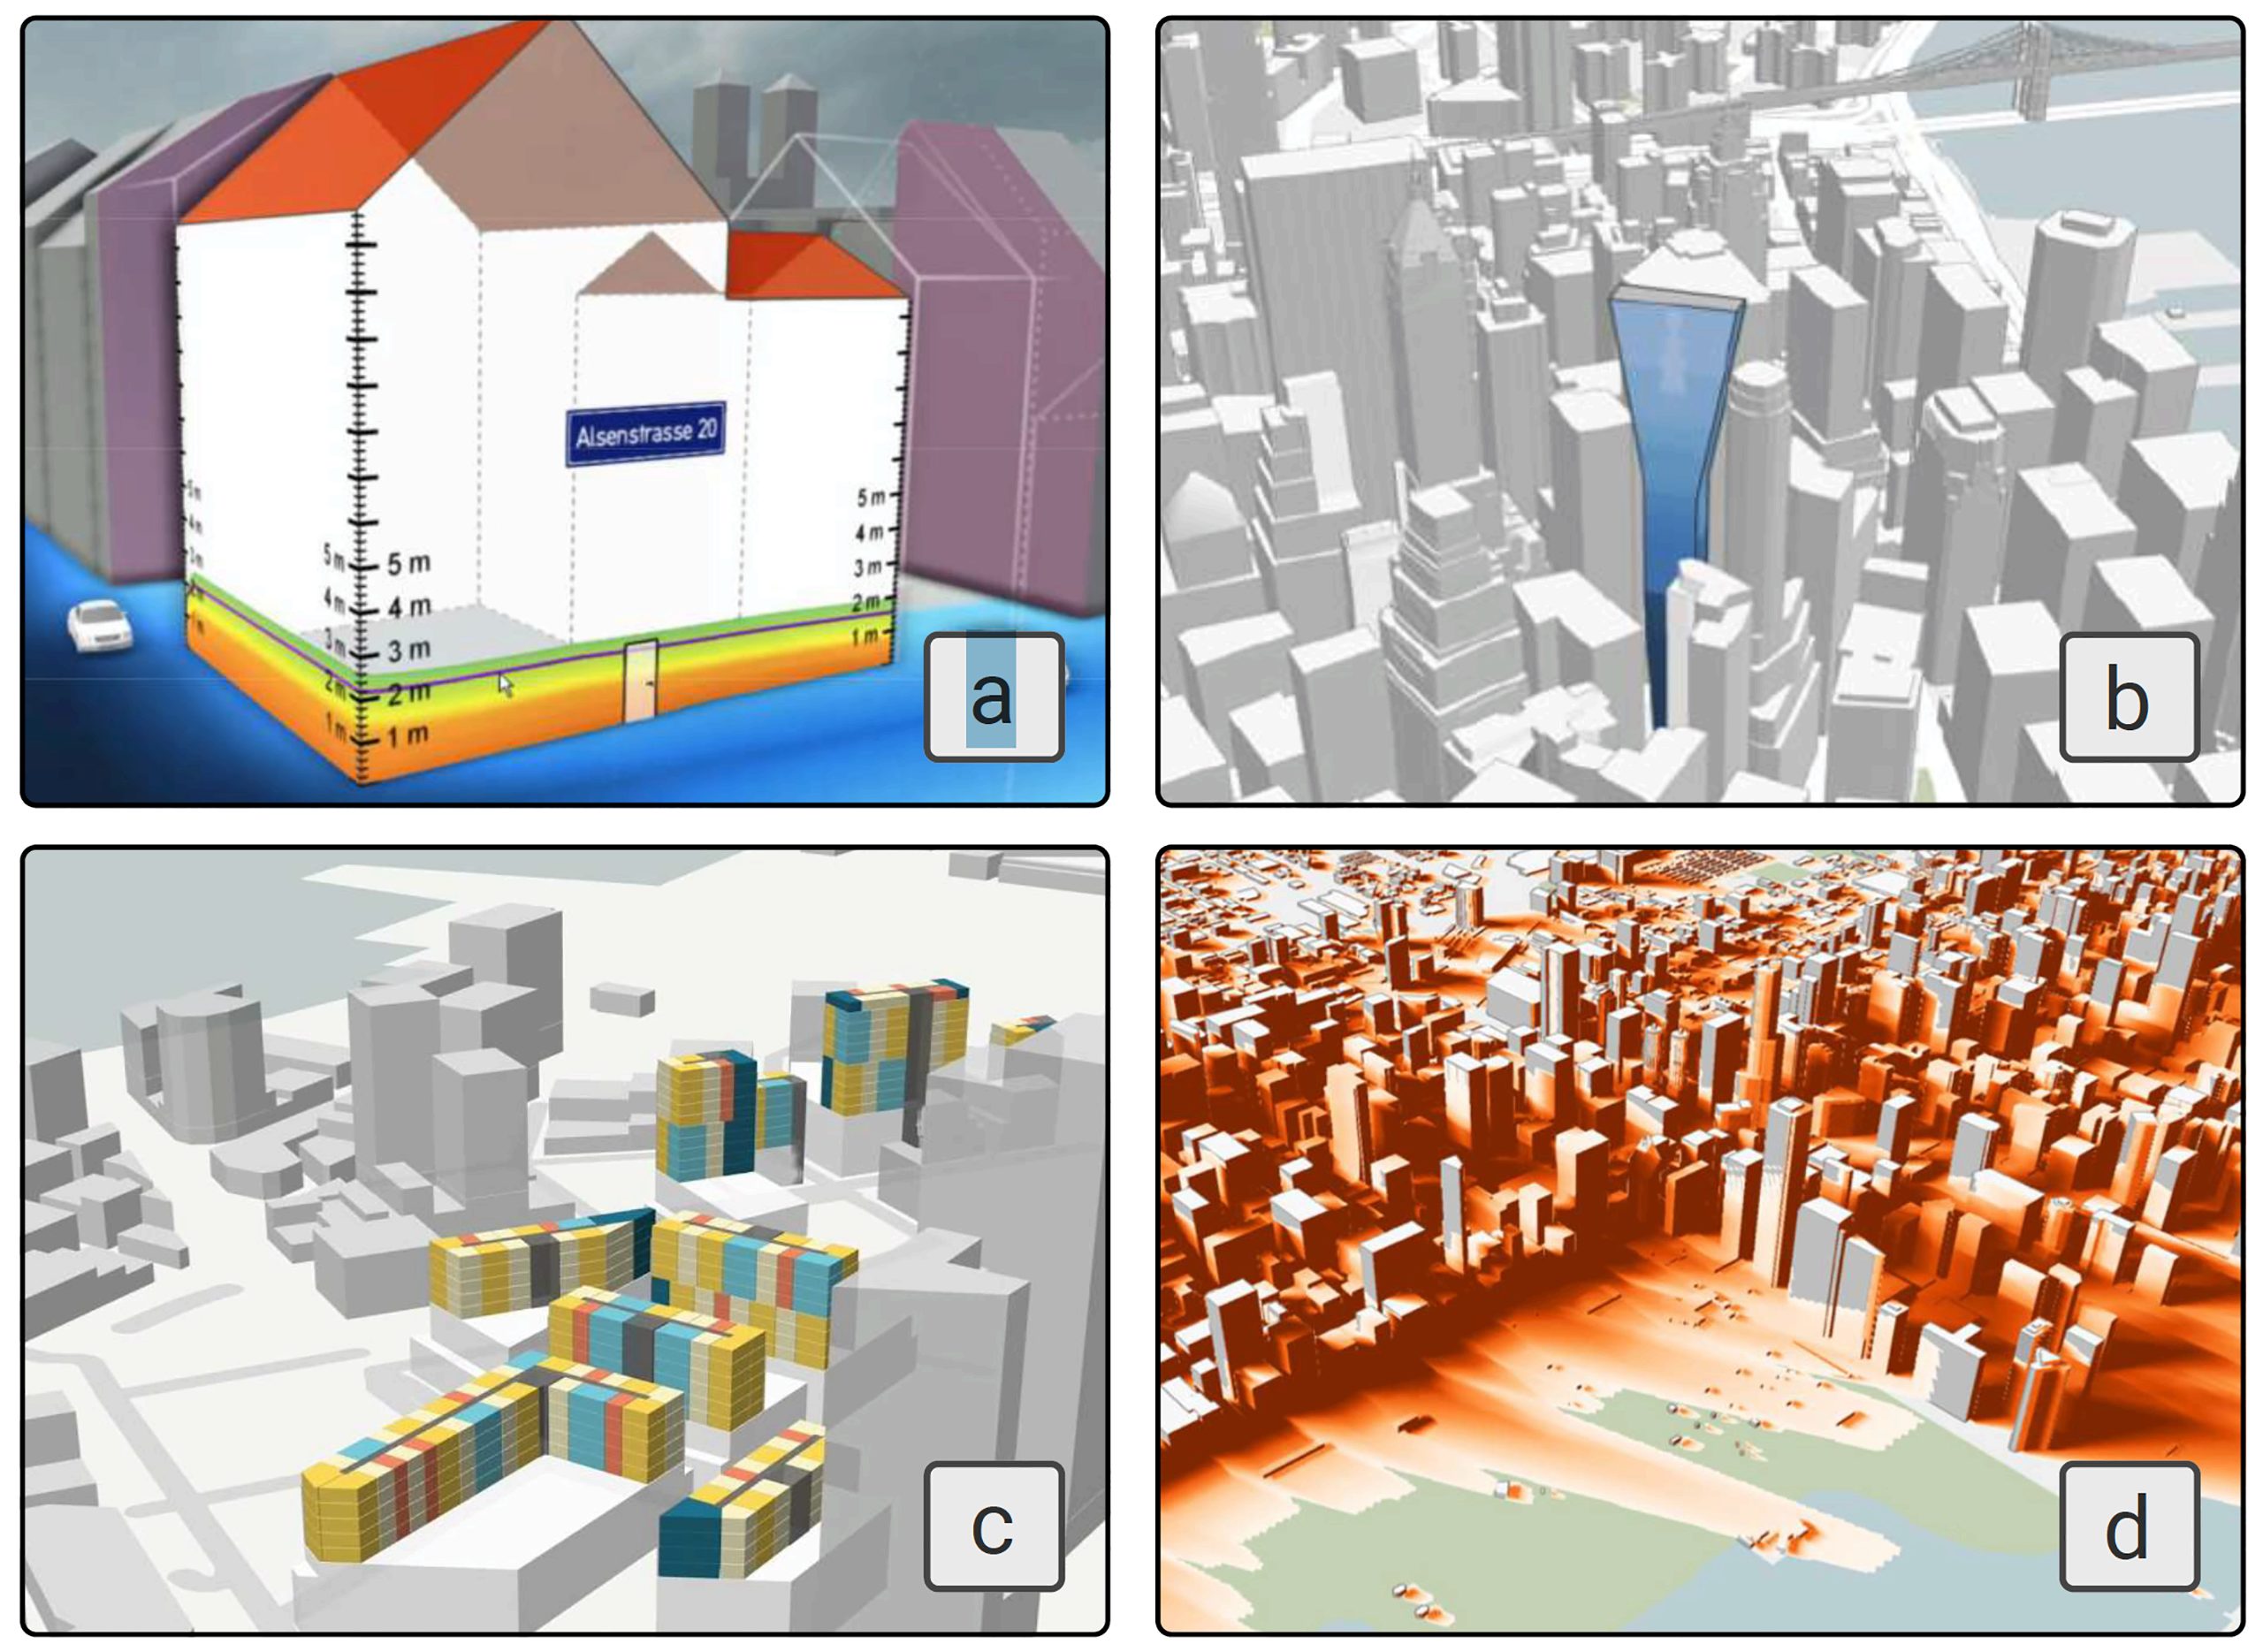 An image named 3d_urban_analytics_ieeevis22.png